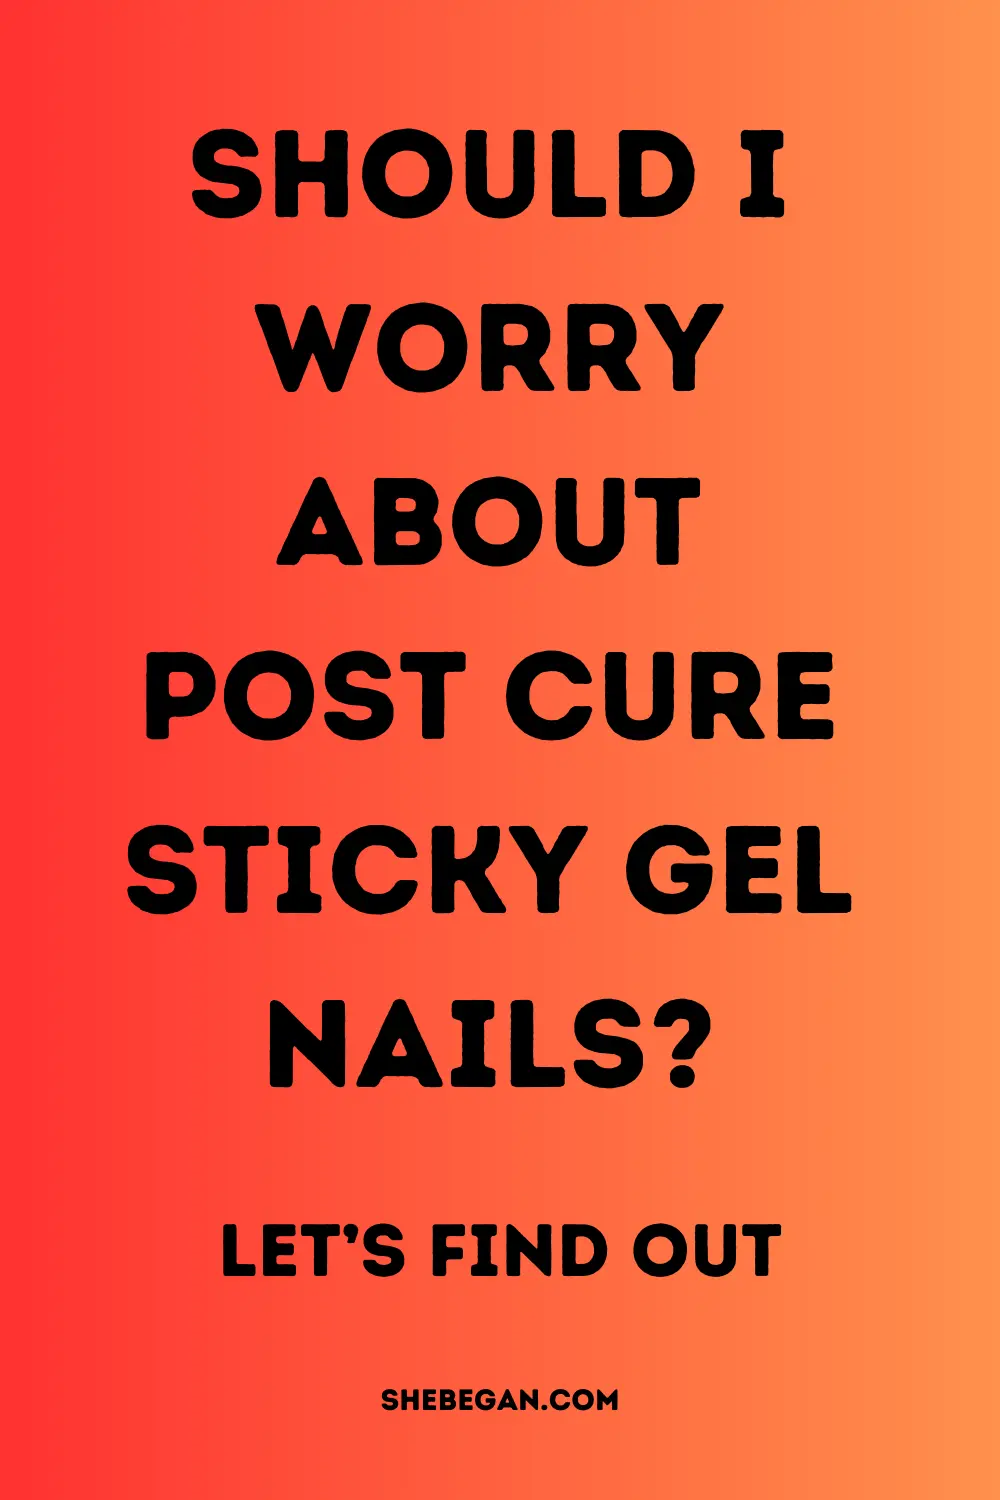 Why Is My Gel Nails Sticky After Curing?